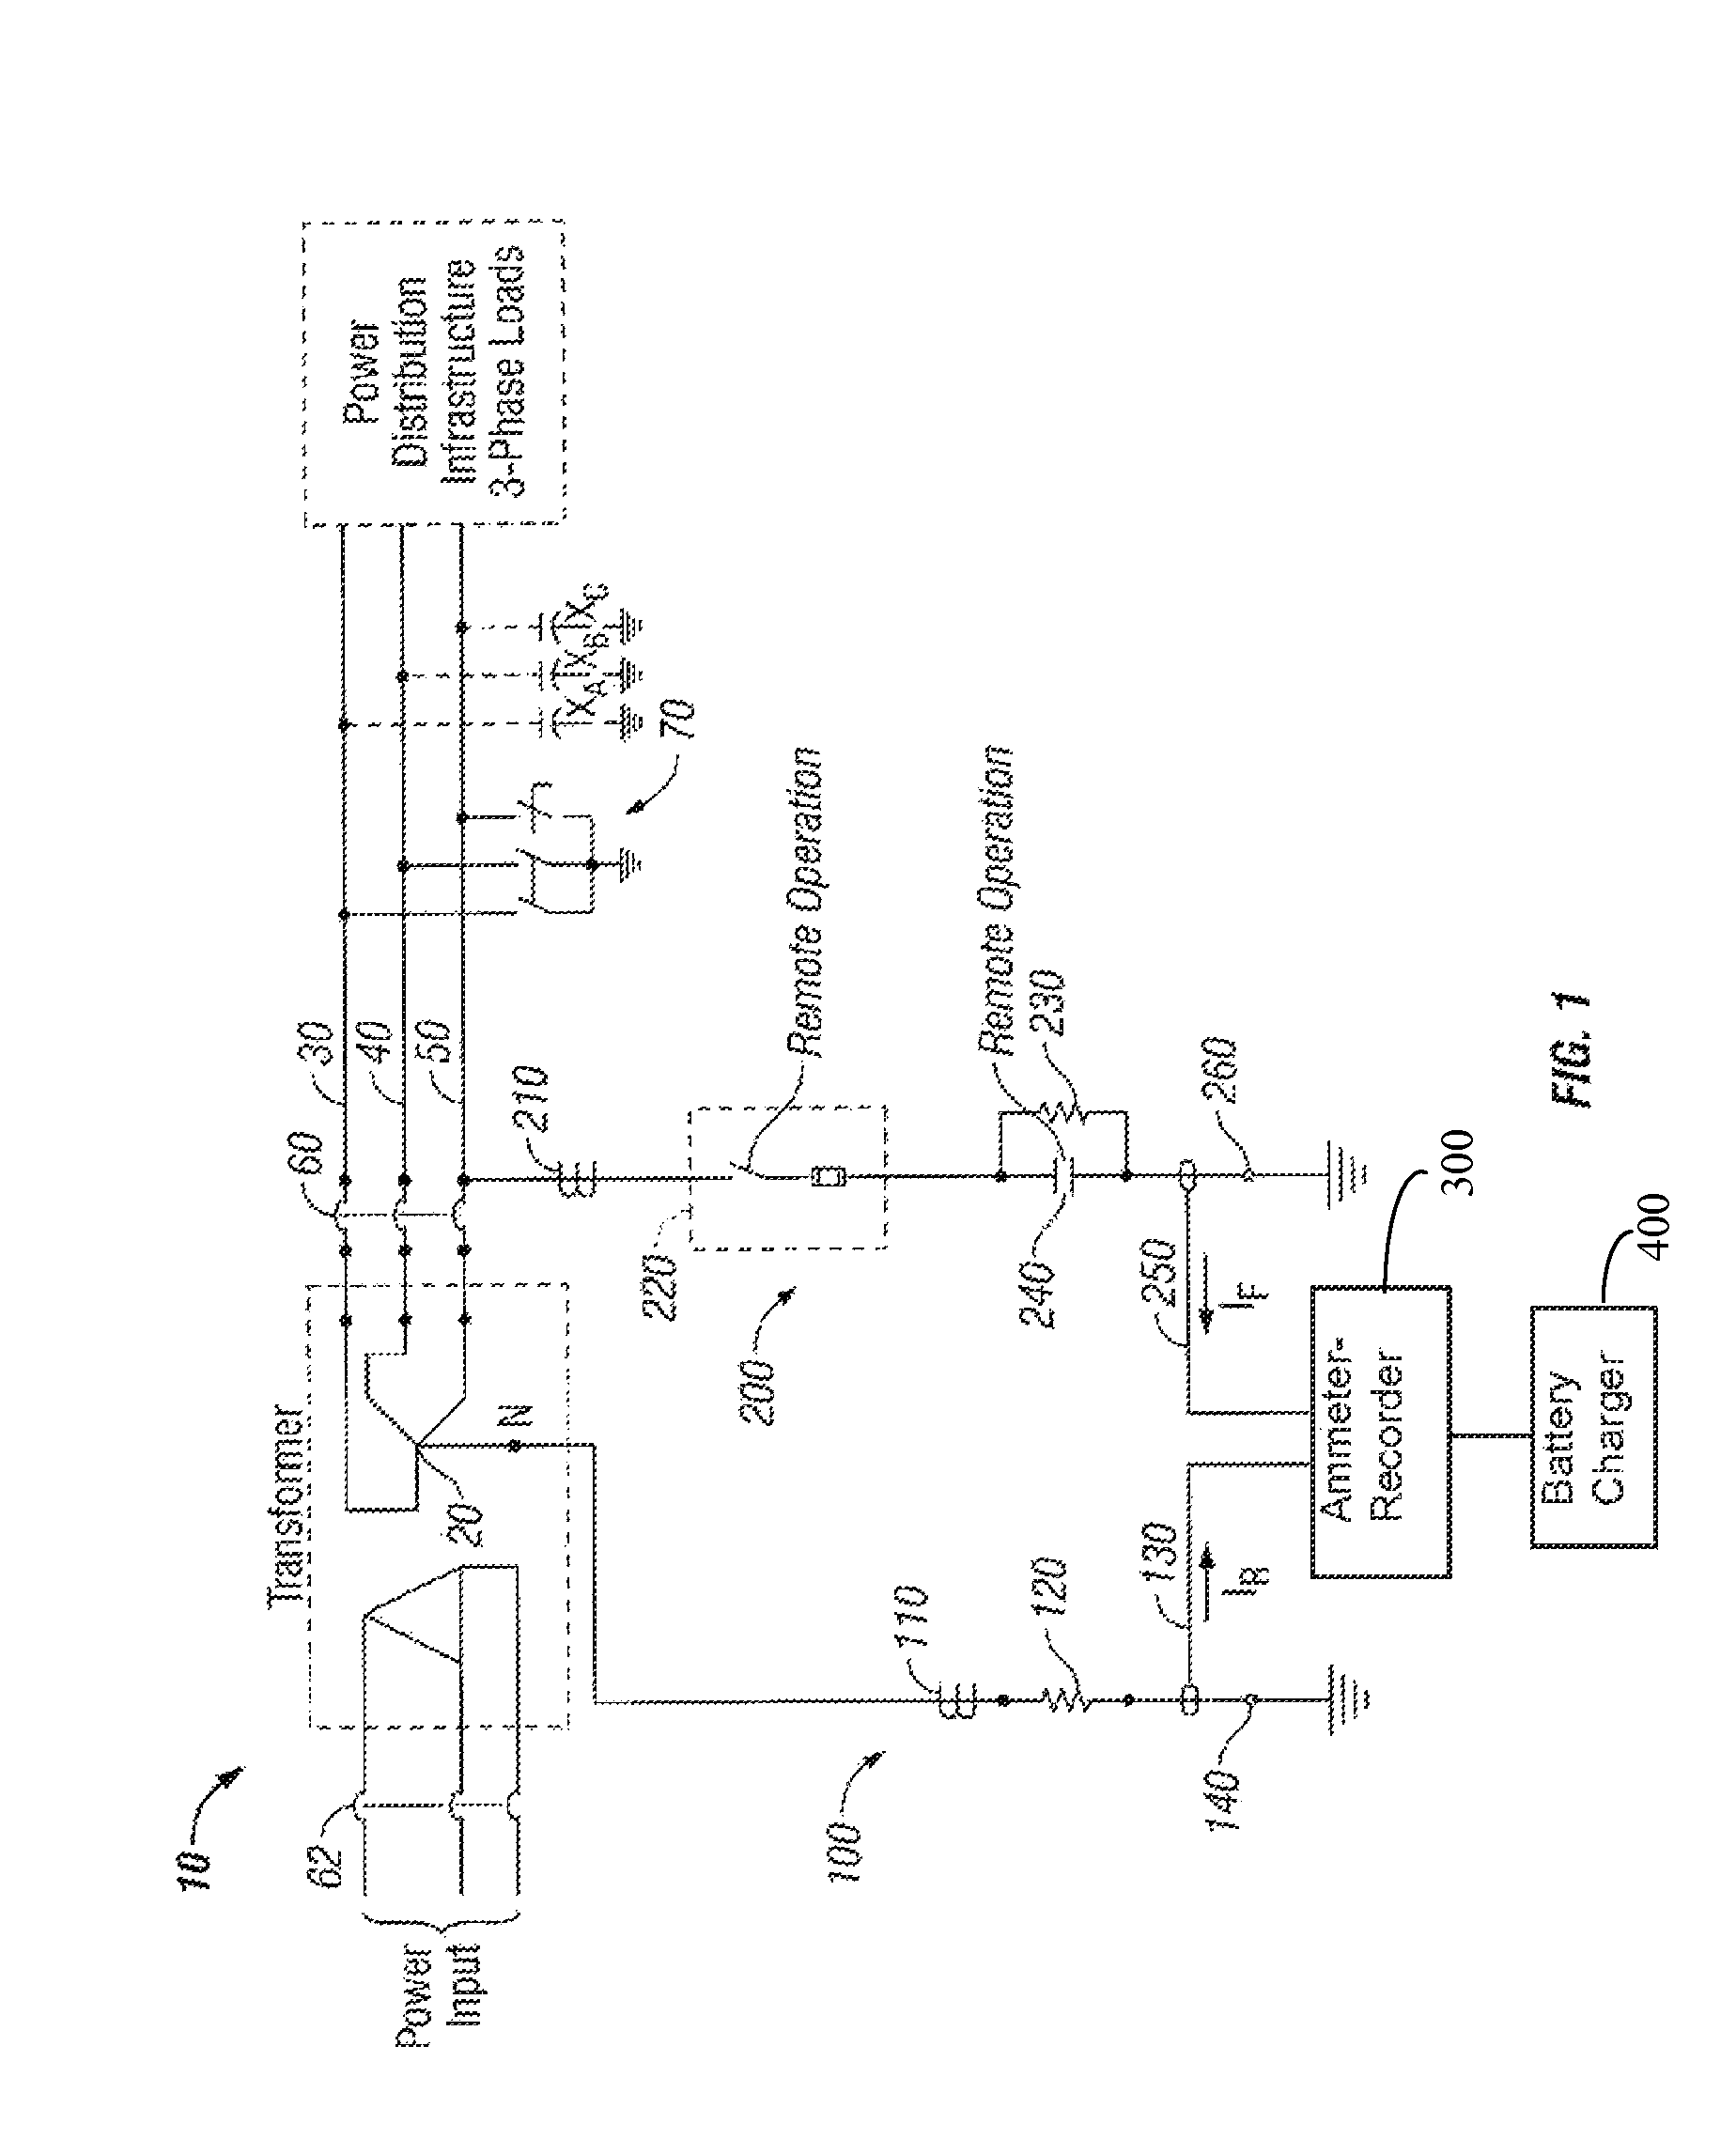 System and method for determining system charging current